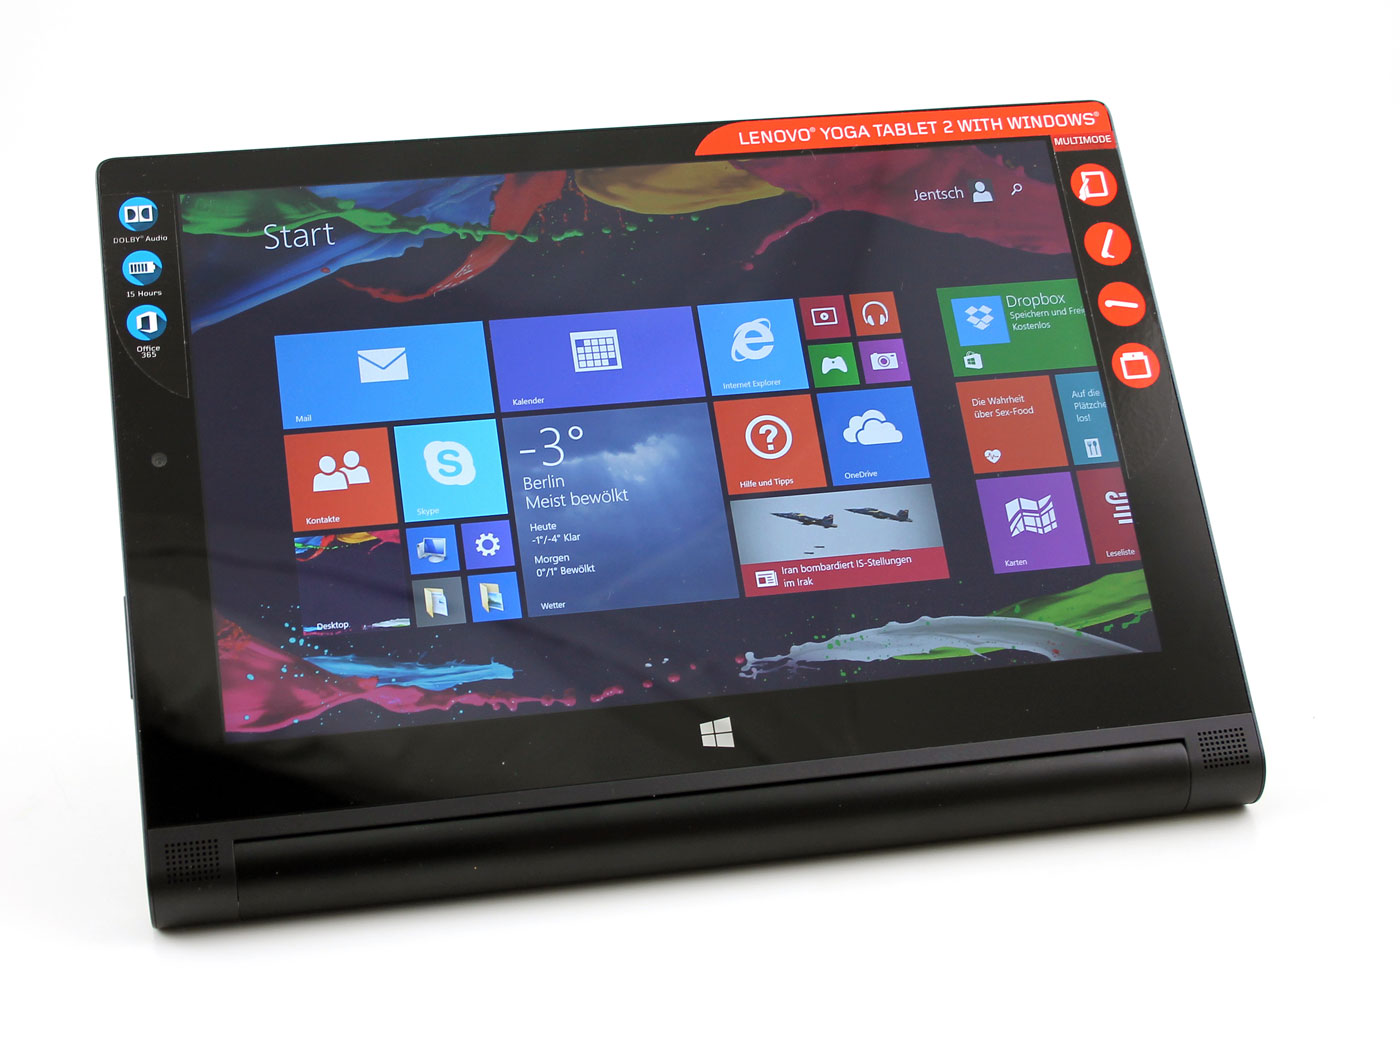 Lenovo Yoga 2 1051f Windows Tablet Review Update Notebookcheck Net Reviews